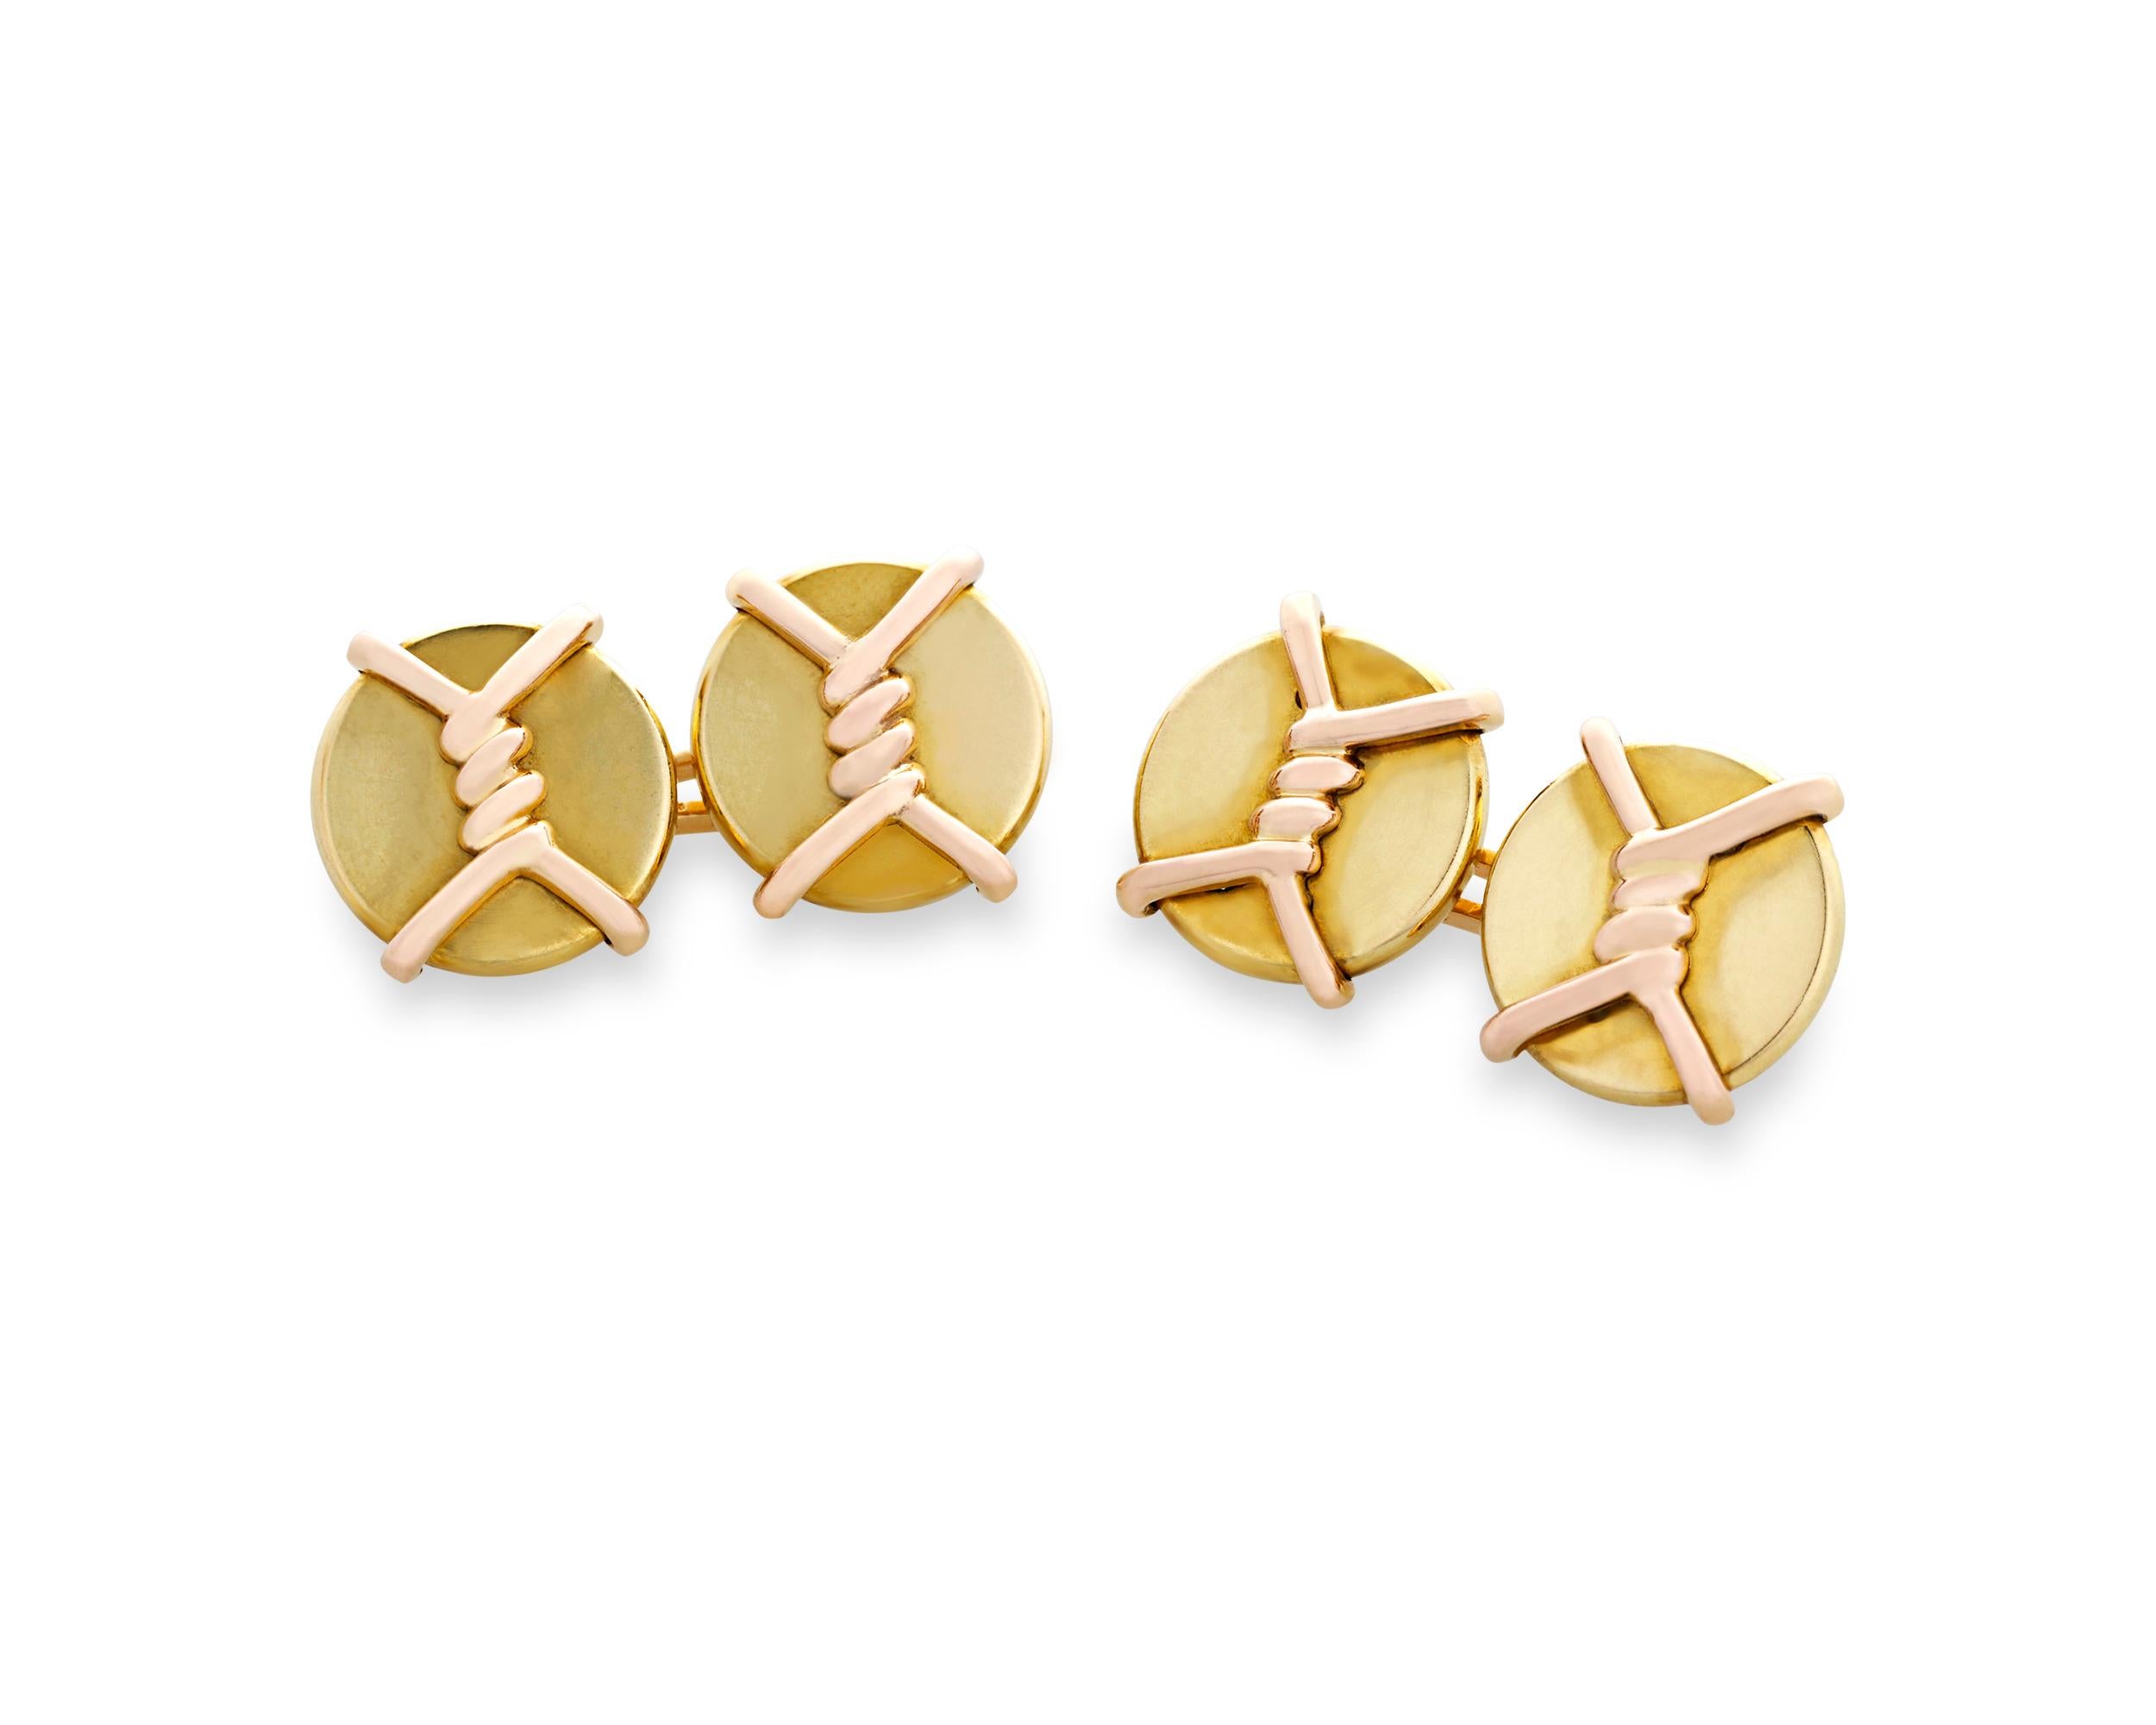 An expression of understated sophistication, these classic Cartier cufflinks pair a unique knot design with 18K yellow gold.

Stamped 